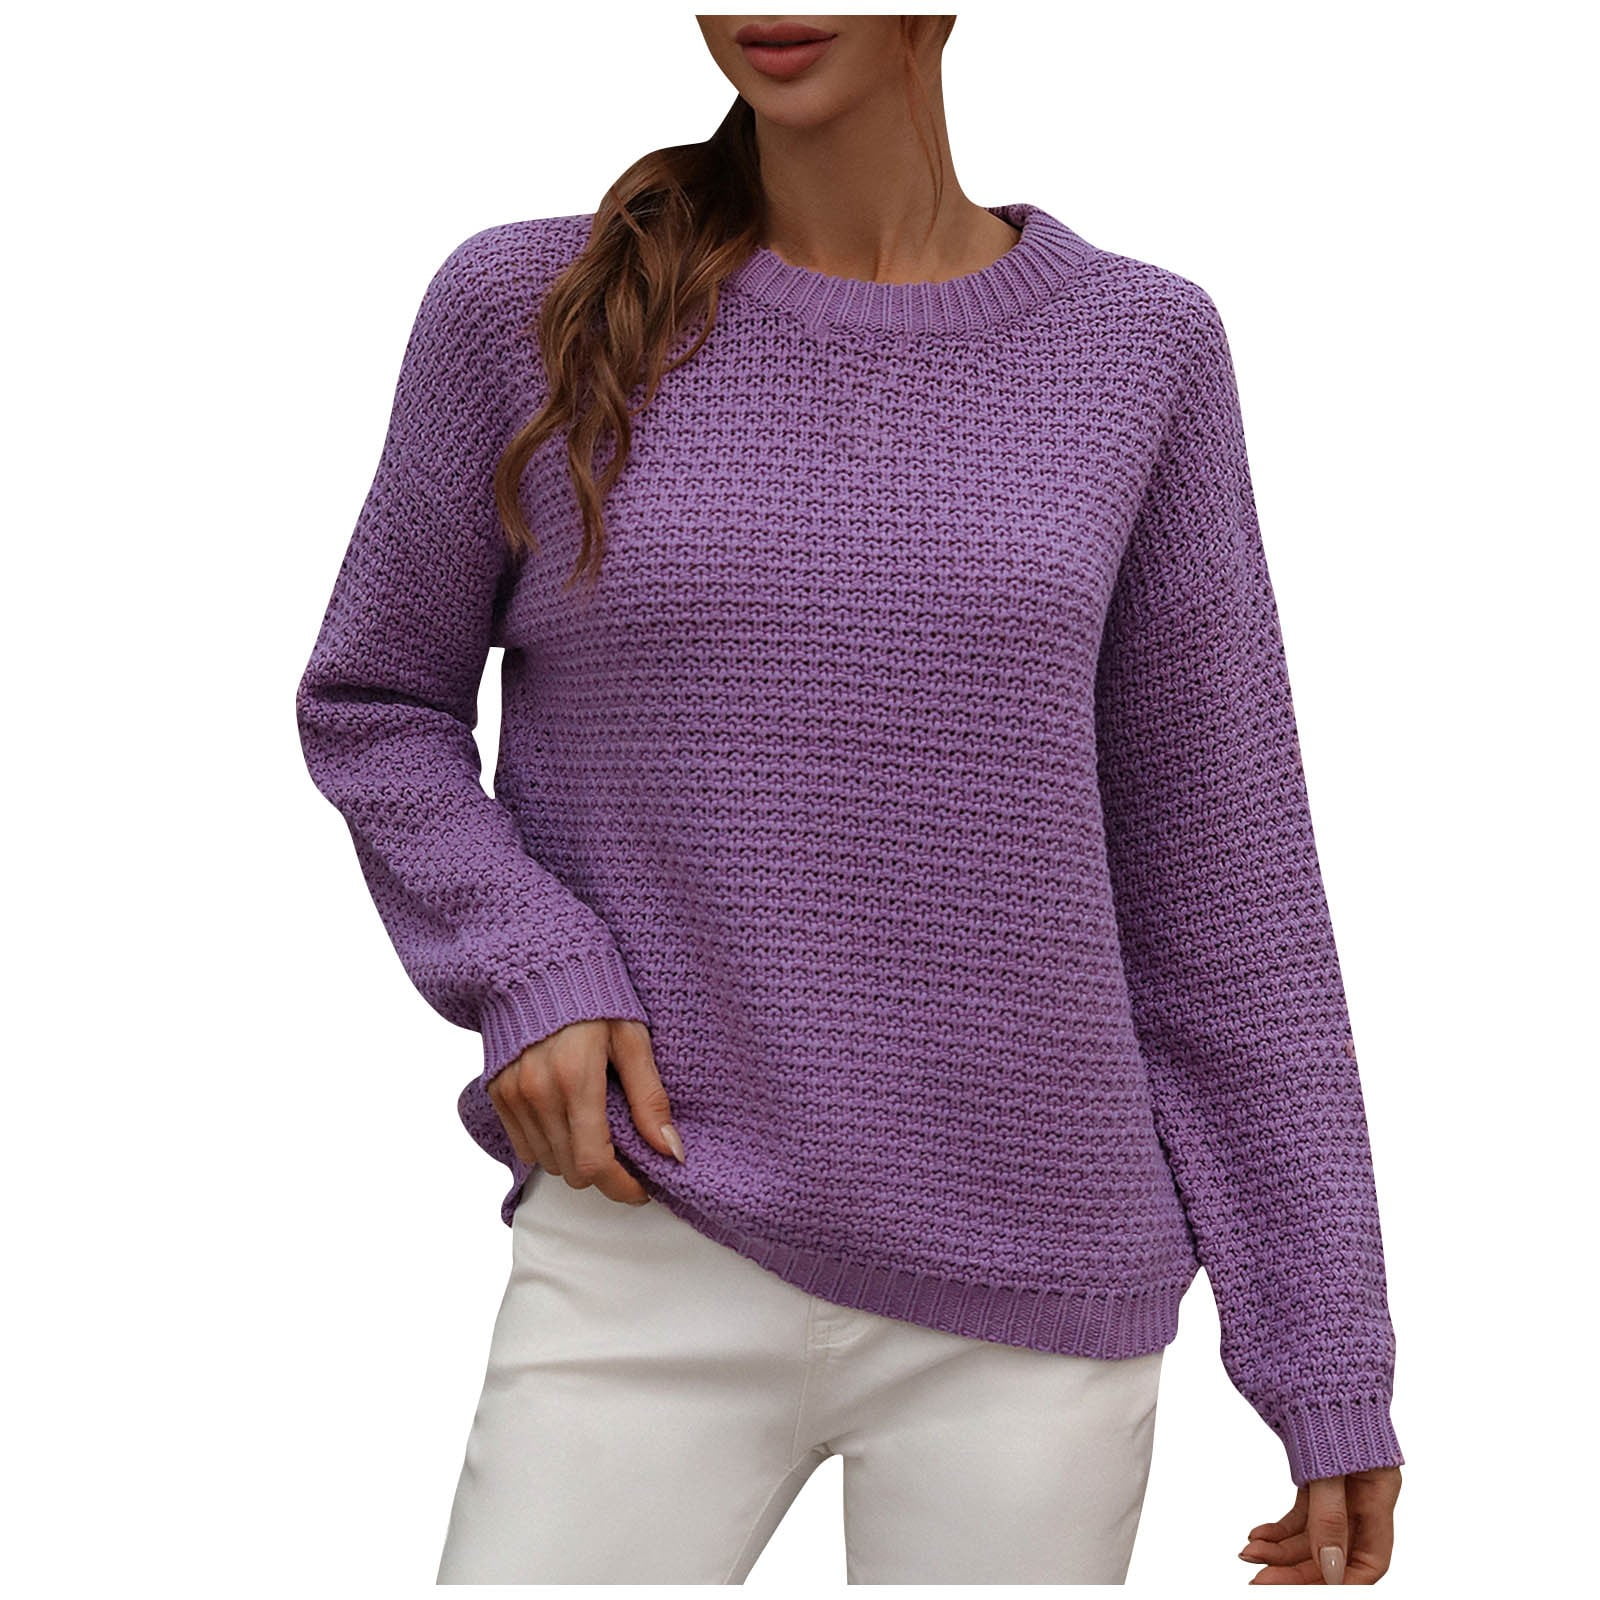 uhnmki Womens Sweaters Pullover Ladies Autumn Winter O Neck Solid